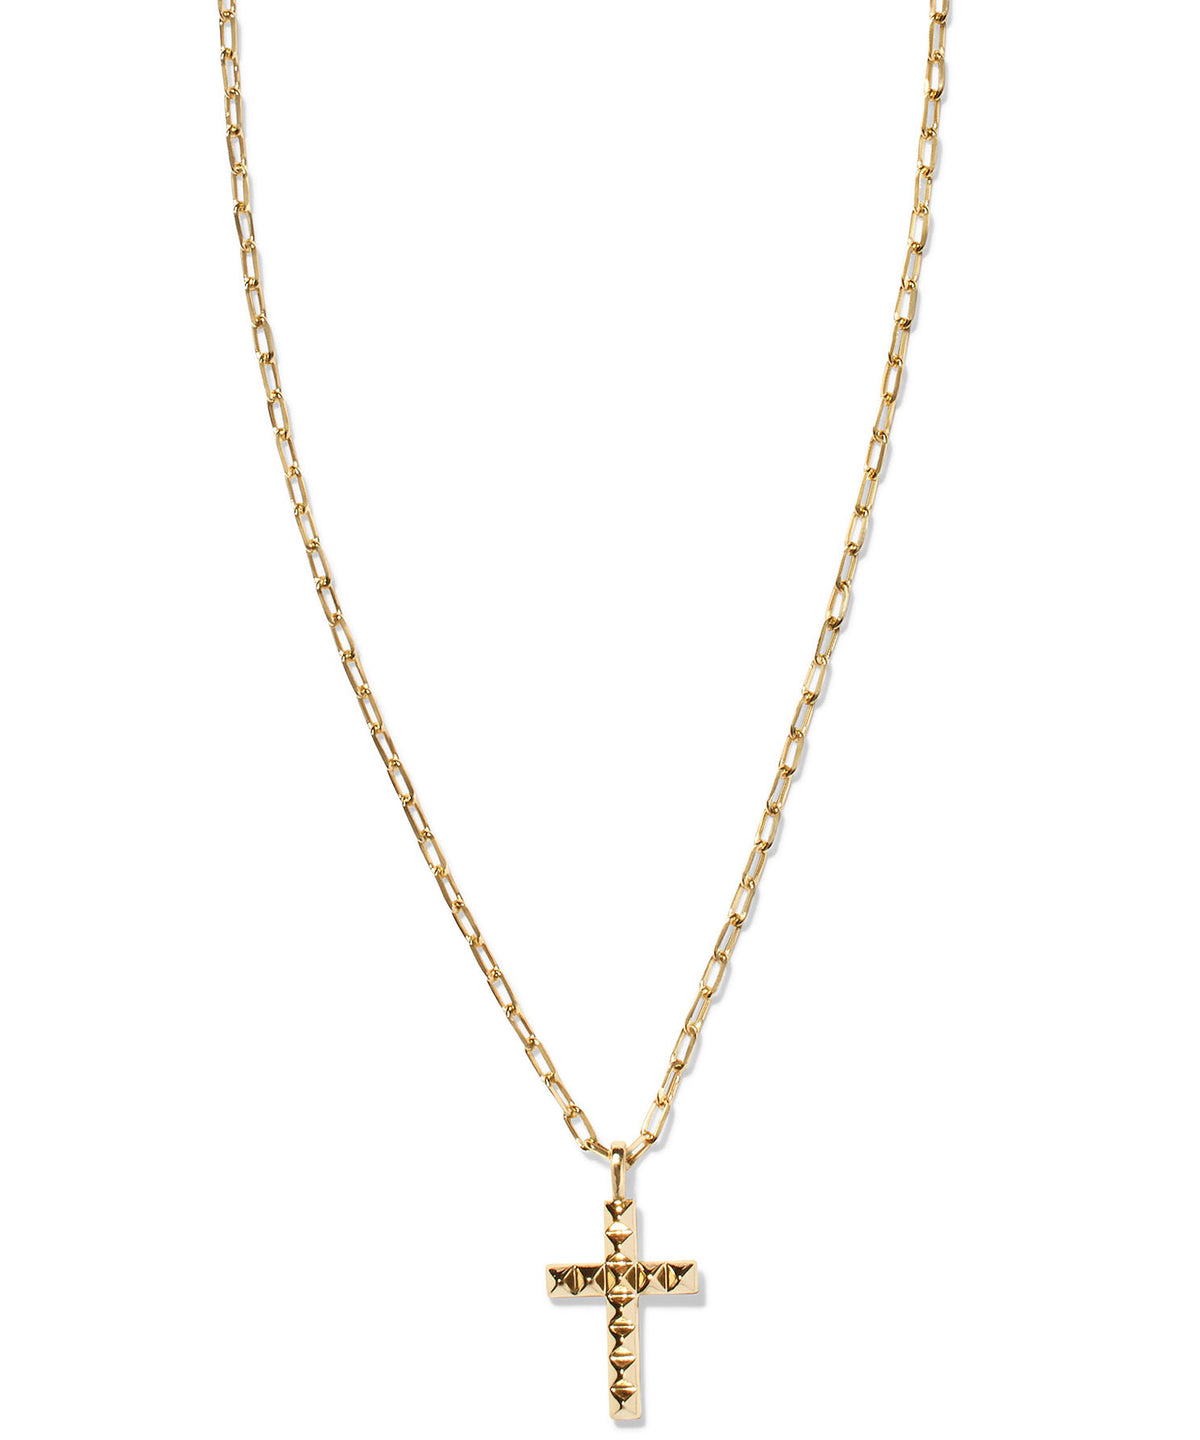 Everleigh Gold Pearl Pendant Necklace in White Pearl | Kendra Scott